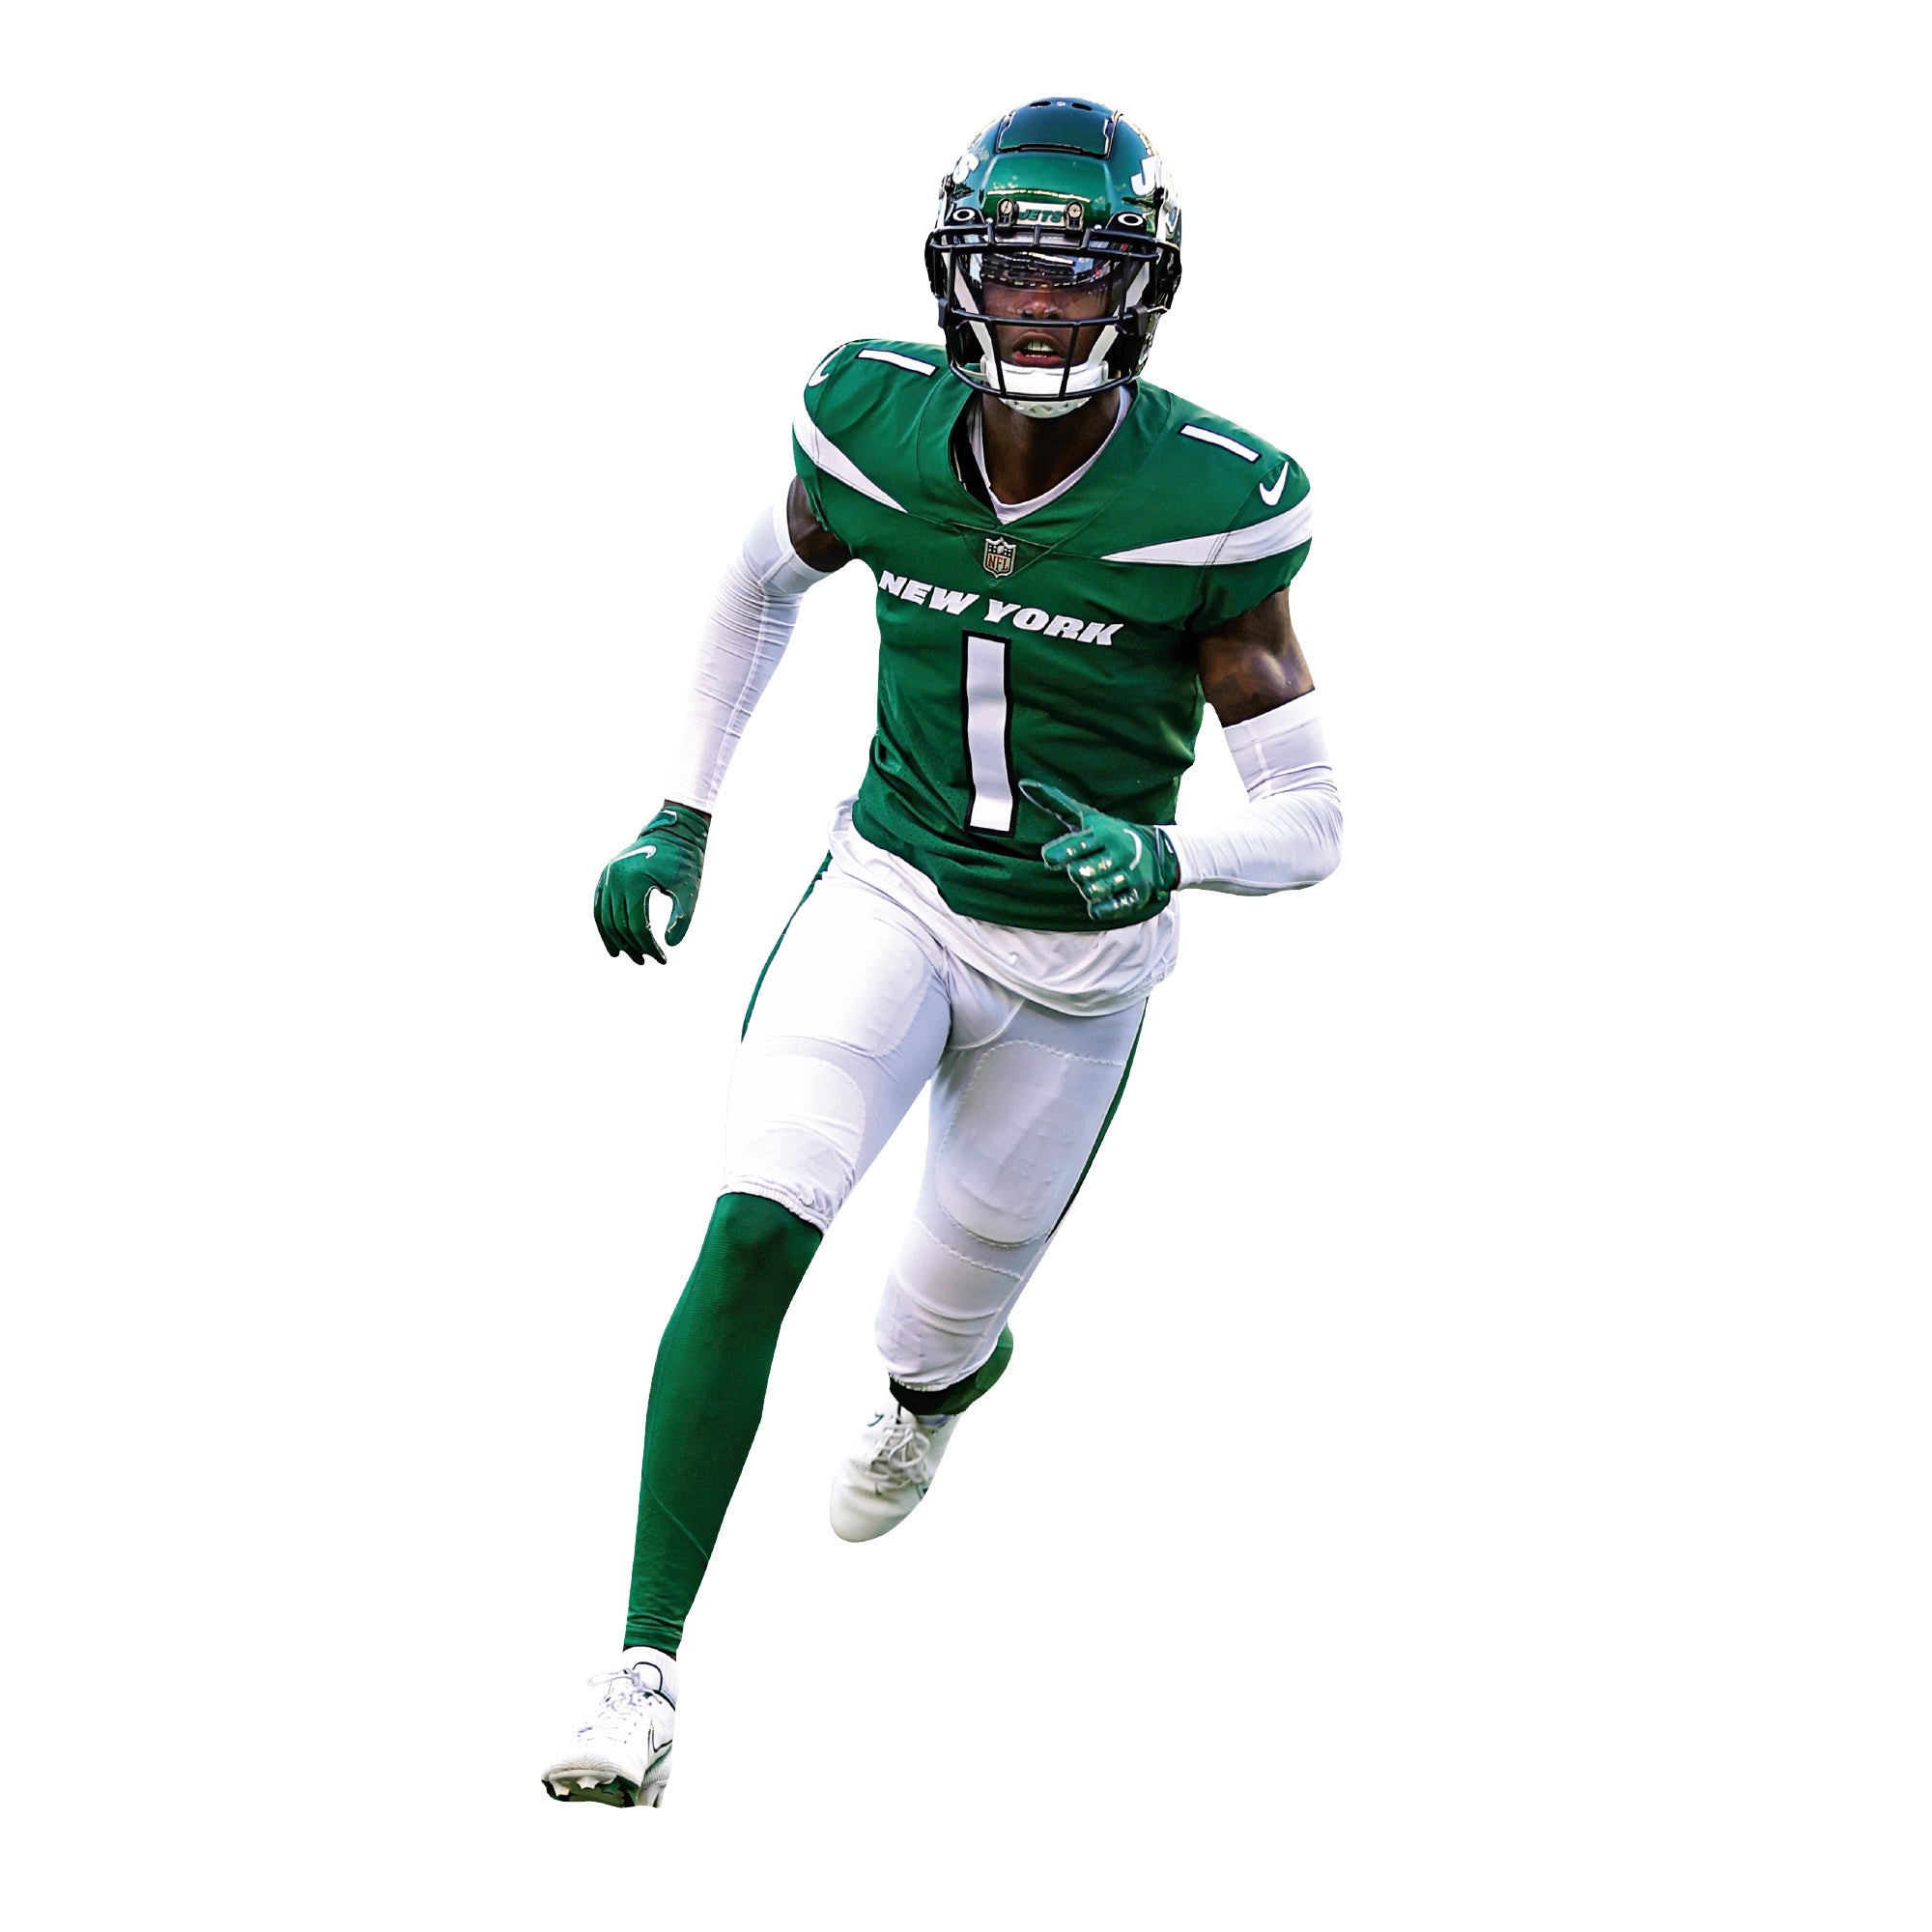 The New York Jets' new uniform designs, as reviewed by an artist